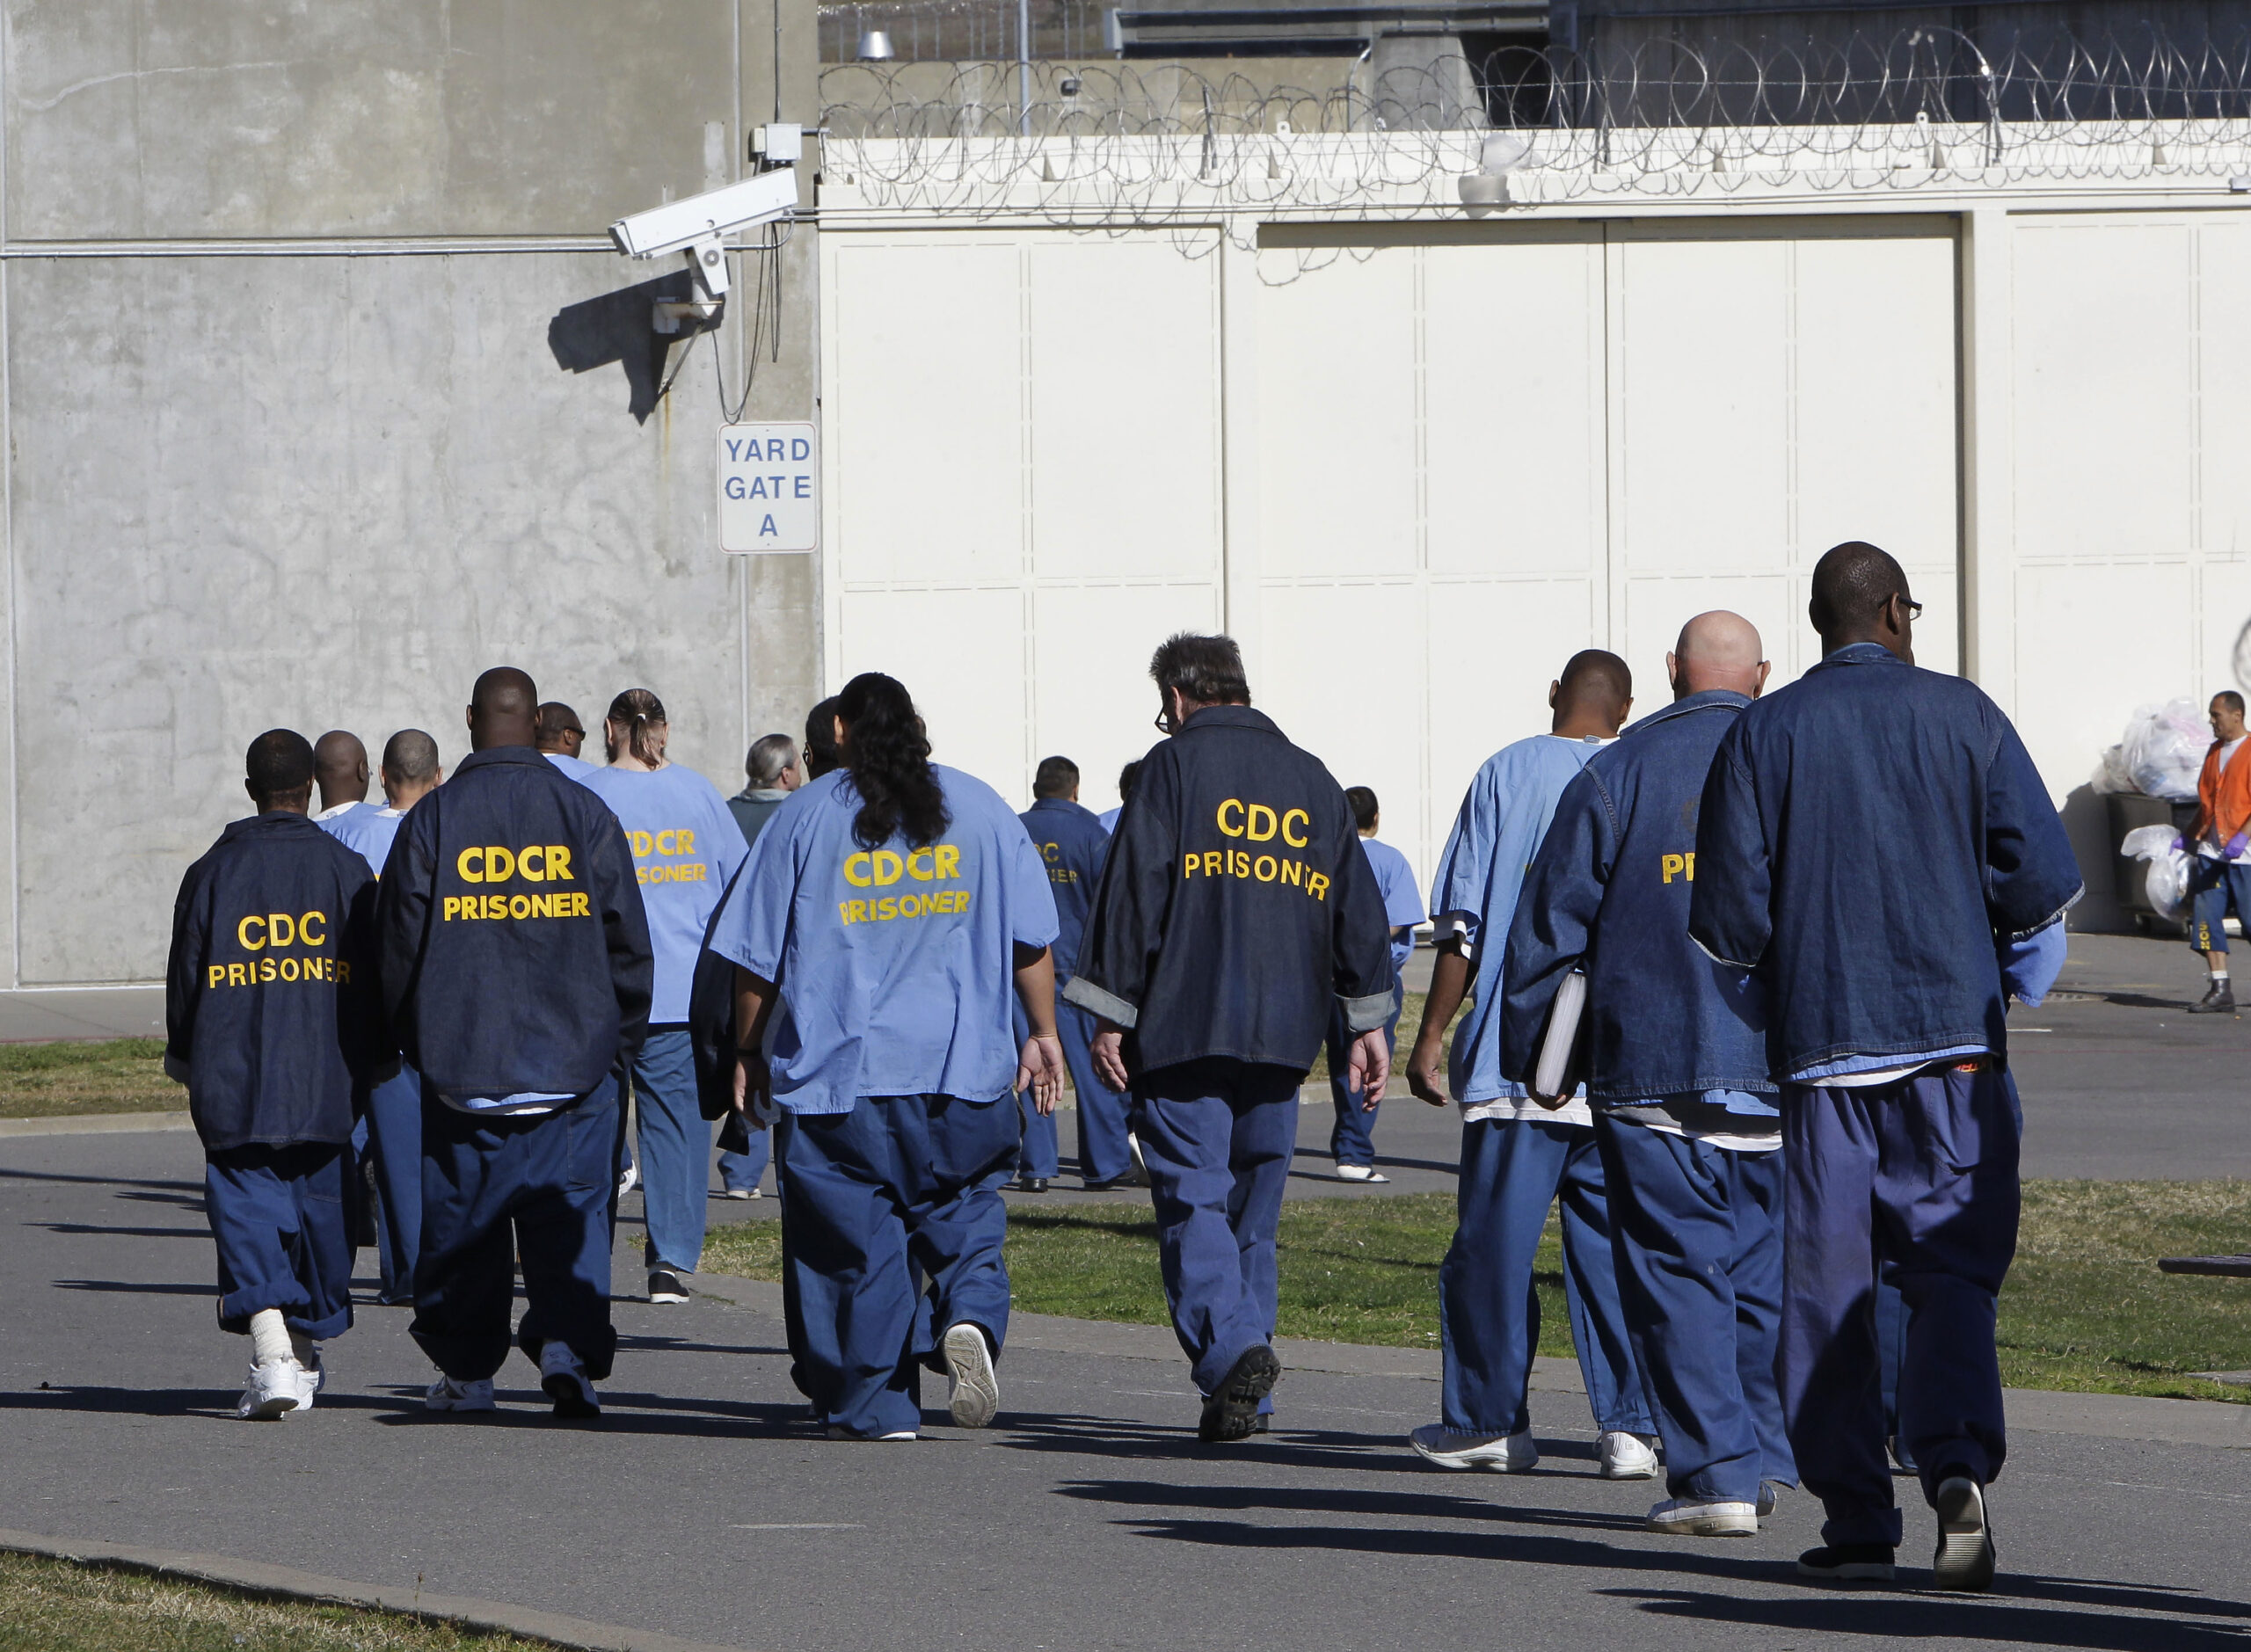 FILE - In this Feb. 26, 2013, file photo, inmates walk through the exercise yard at California State Prison Sacramento, near Folsom, Calif. California is giving 76,000 inmates, including violent and repeat felons, the opportunity to leave prison earlier as the state aims to further trim the population of what once was the nation's largest state correctional system. The new rules take effect Saturday, May 1, 2021, but it will be months or years before any inmates go free earlier. (AP Photo/Rich Pedroncelli, File)